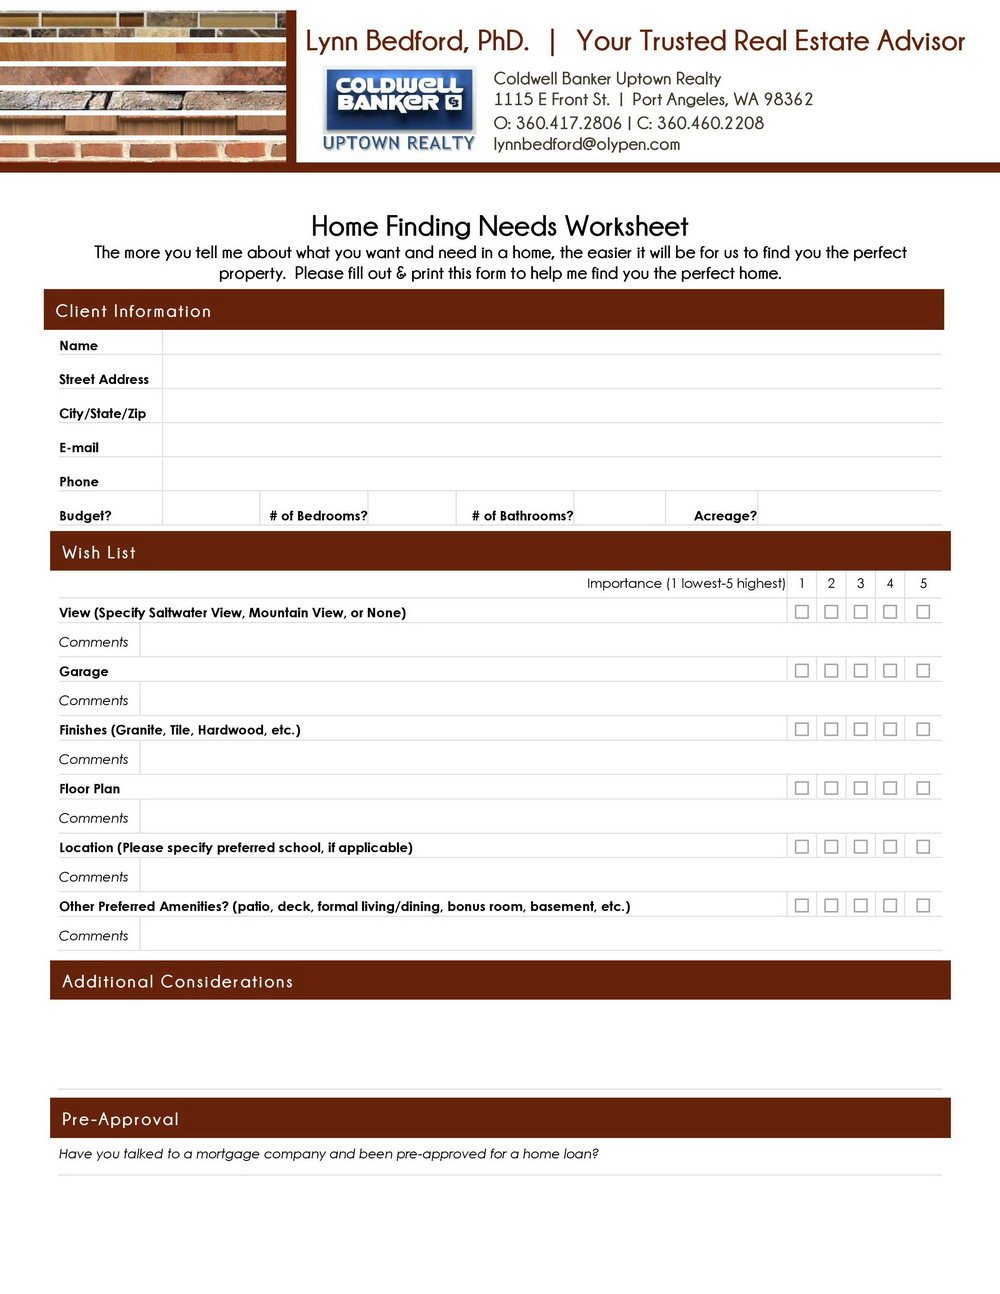 Fha Refinance Worksheet Rate And Term  Universal Network Pertaining To Conventional To Fha Refinance Worksheet